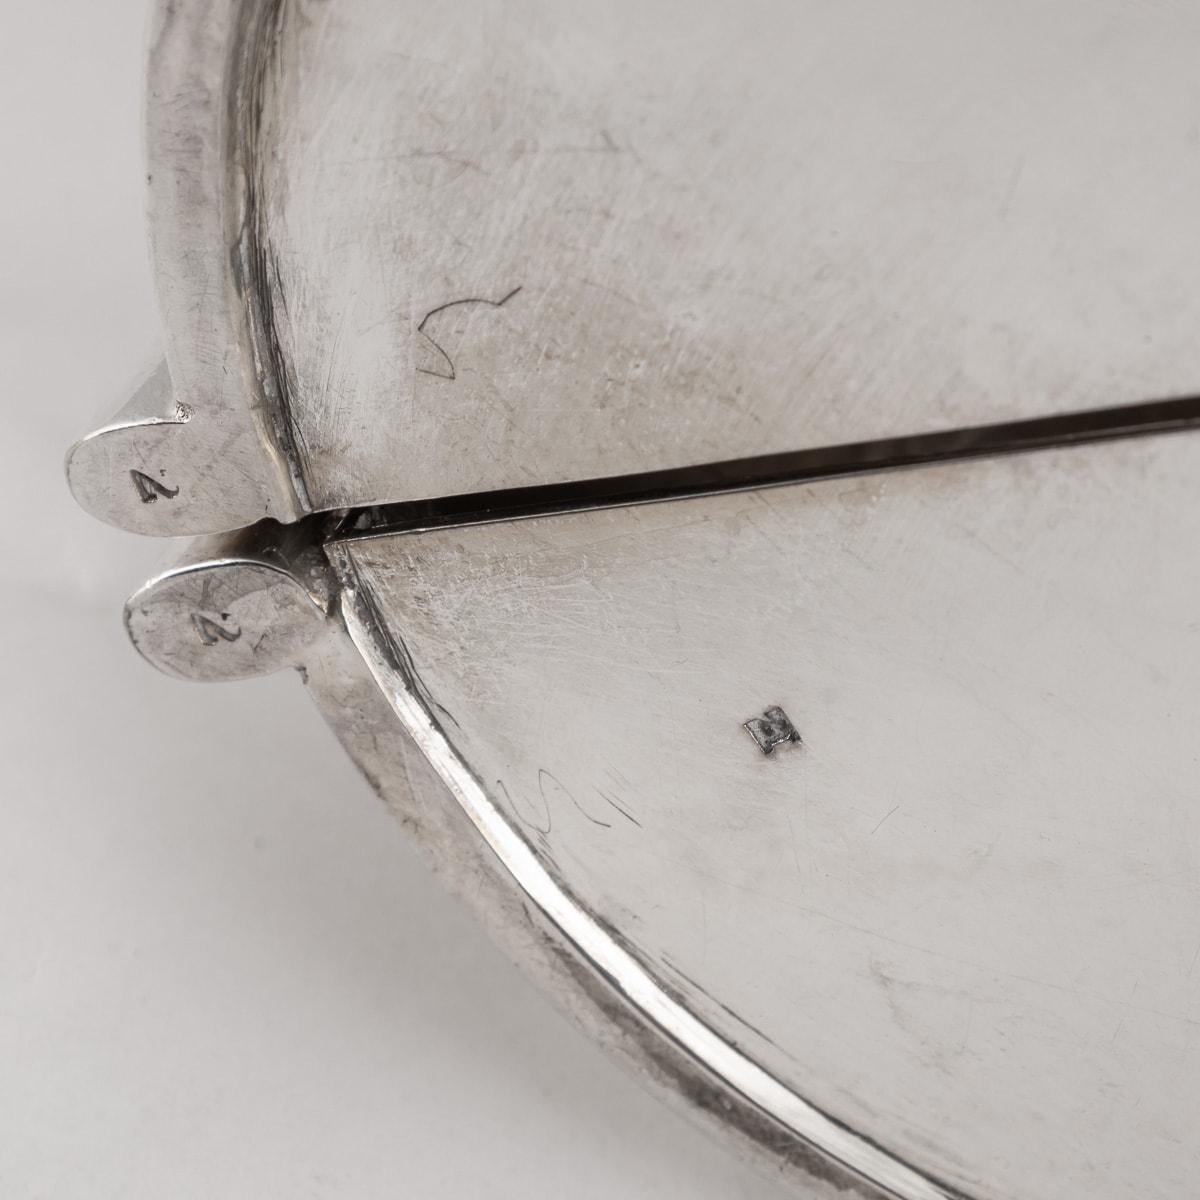 20th Century English Silver Plate Bottle Holder By Mappin & Webb, c.1930 For Sale 6